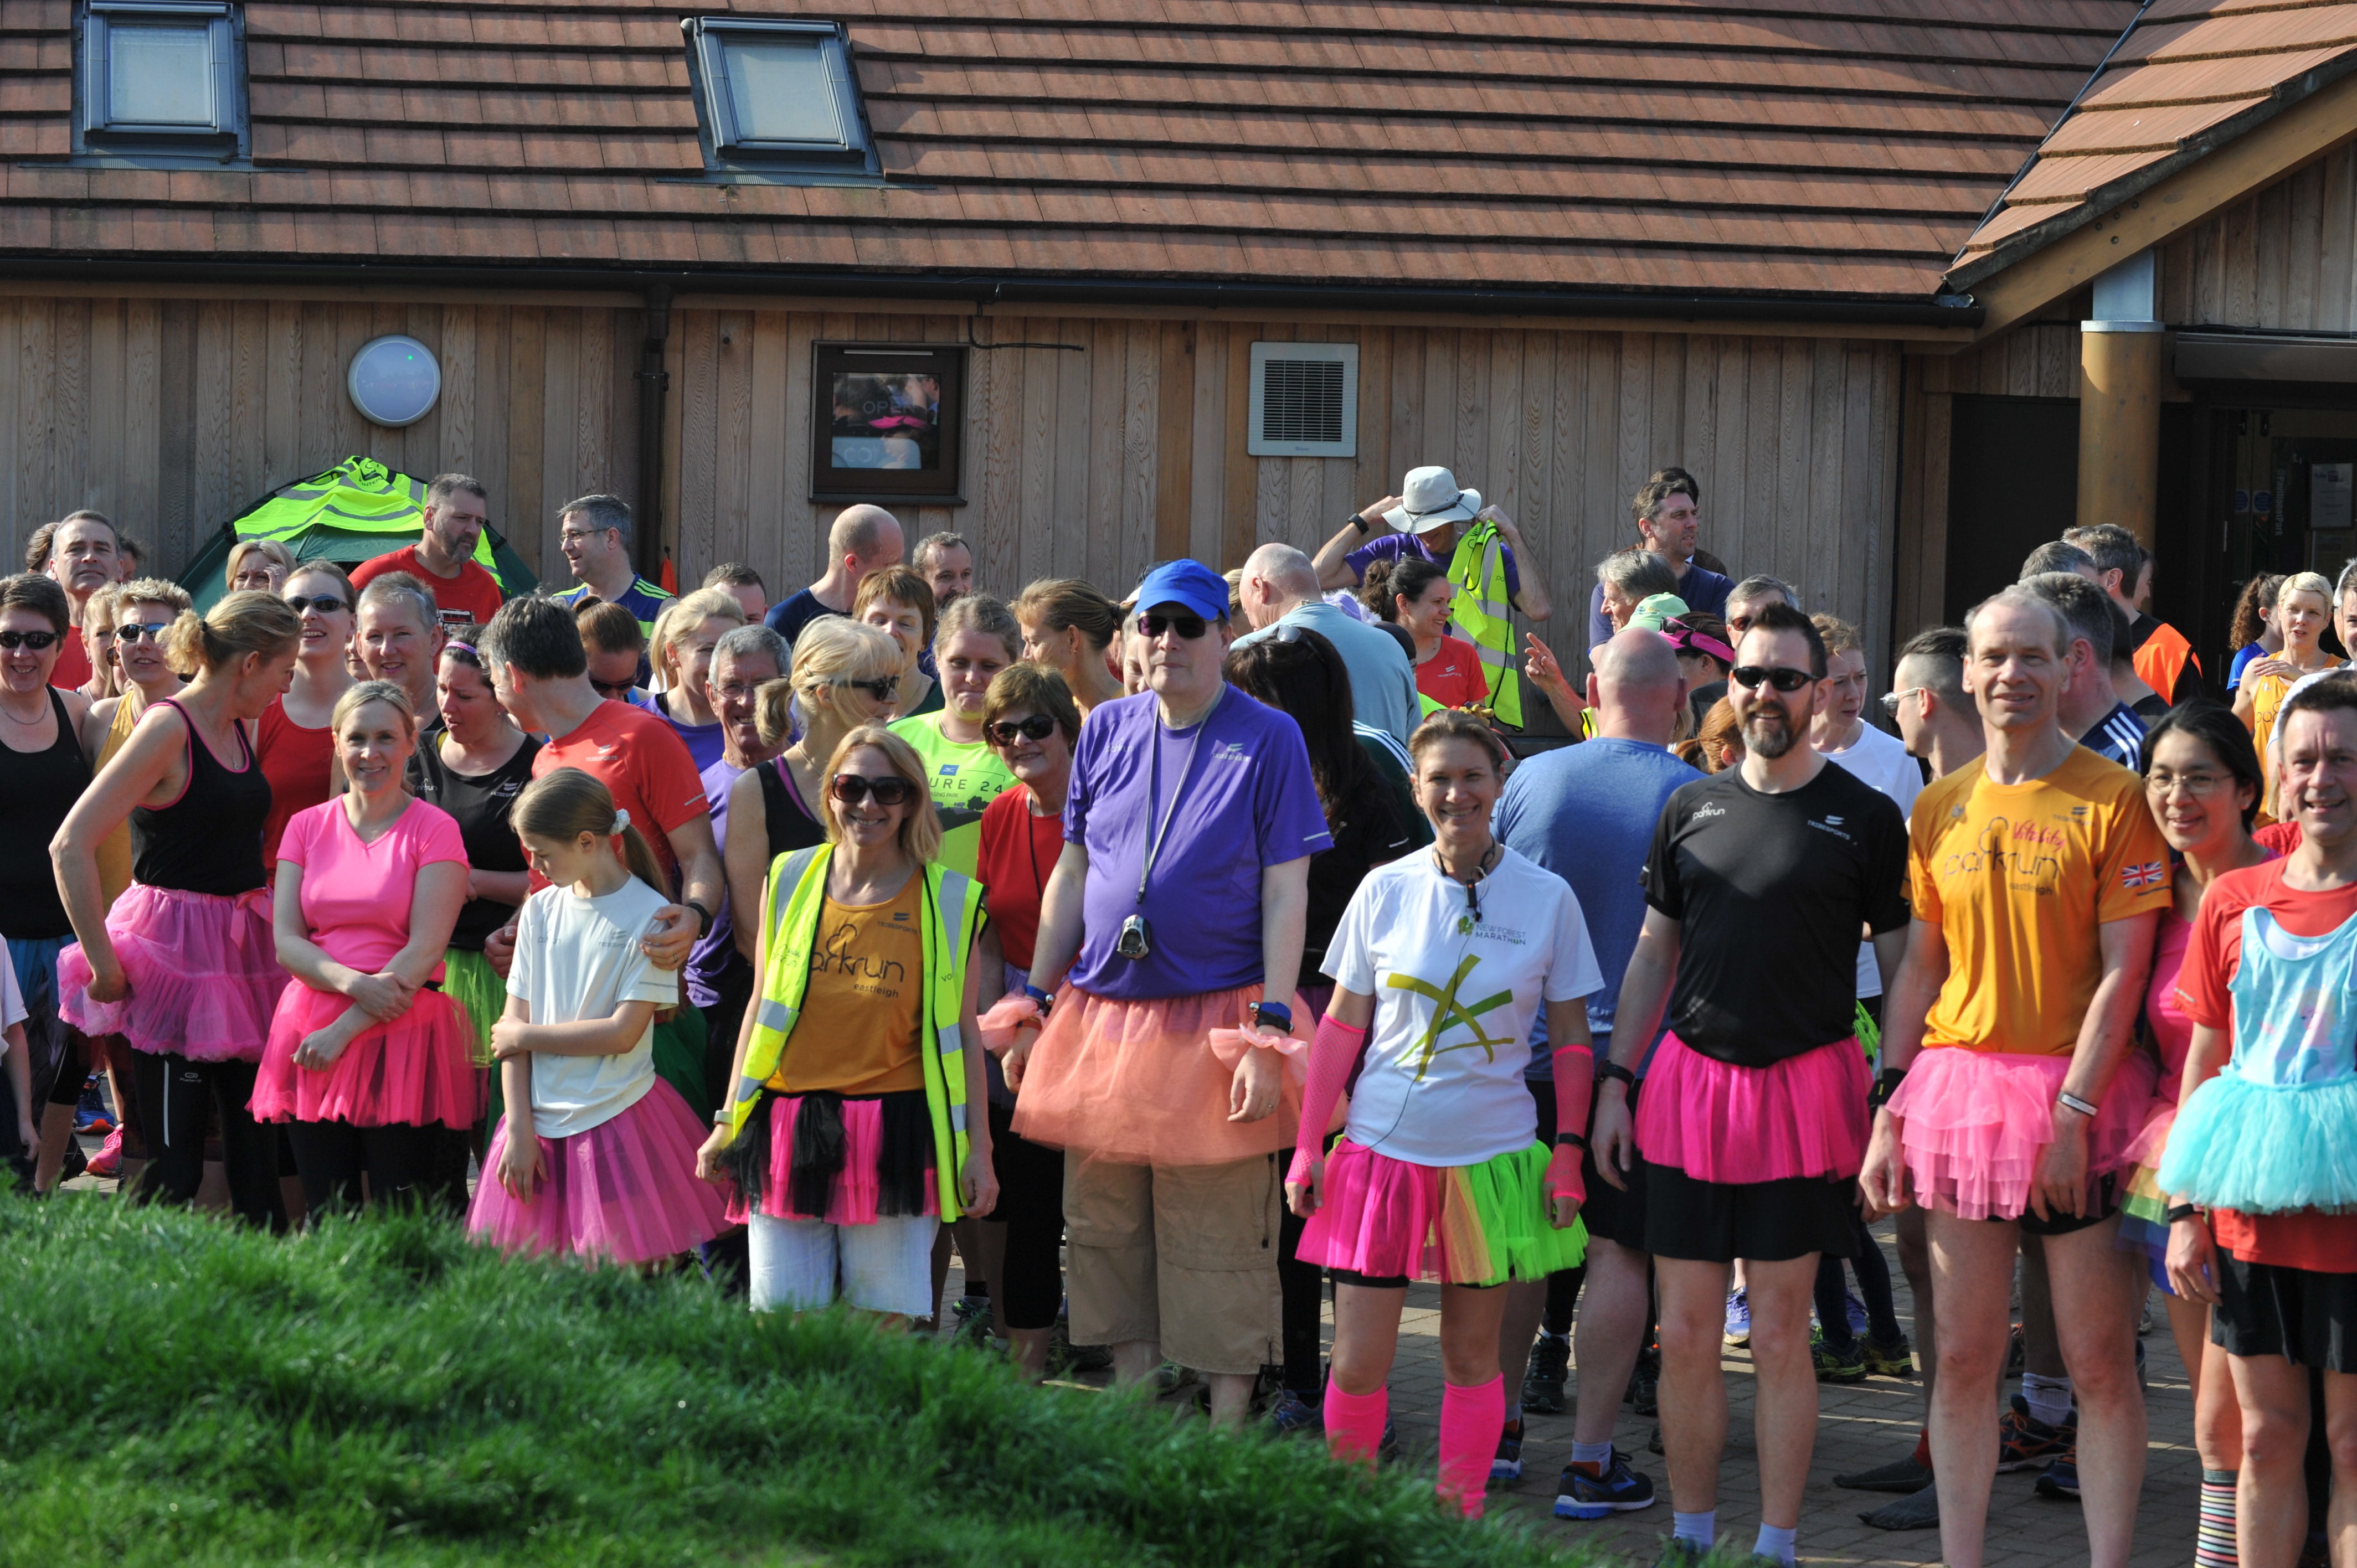 A group of parkrunners display their tutus at the event briefing for the 400th Eastleigh parkrun